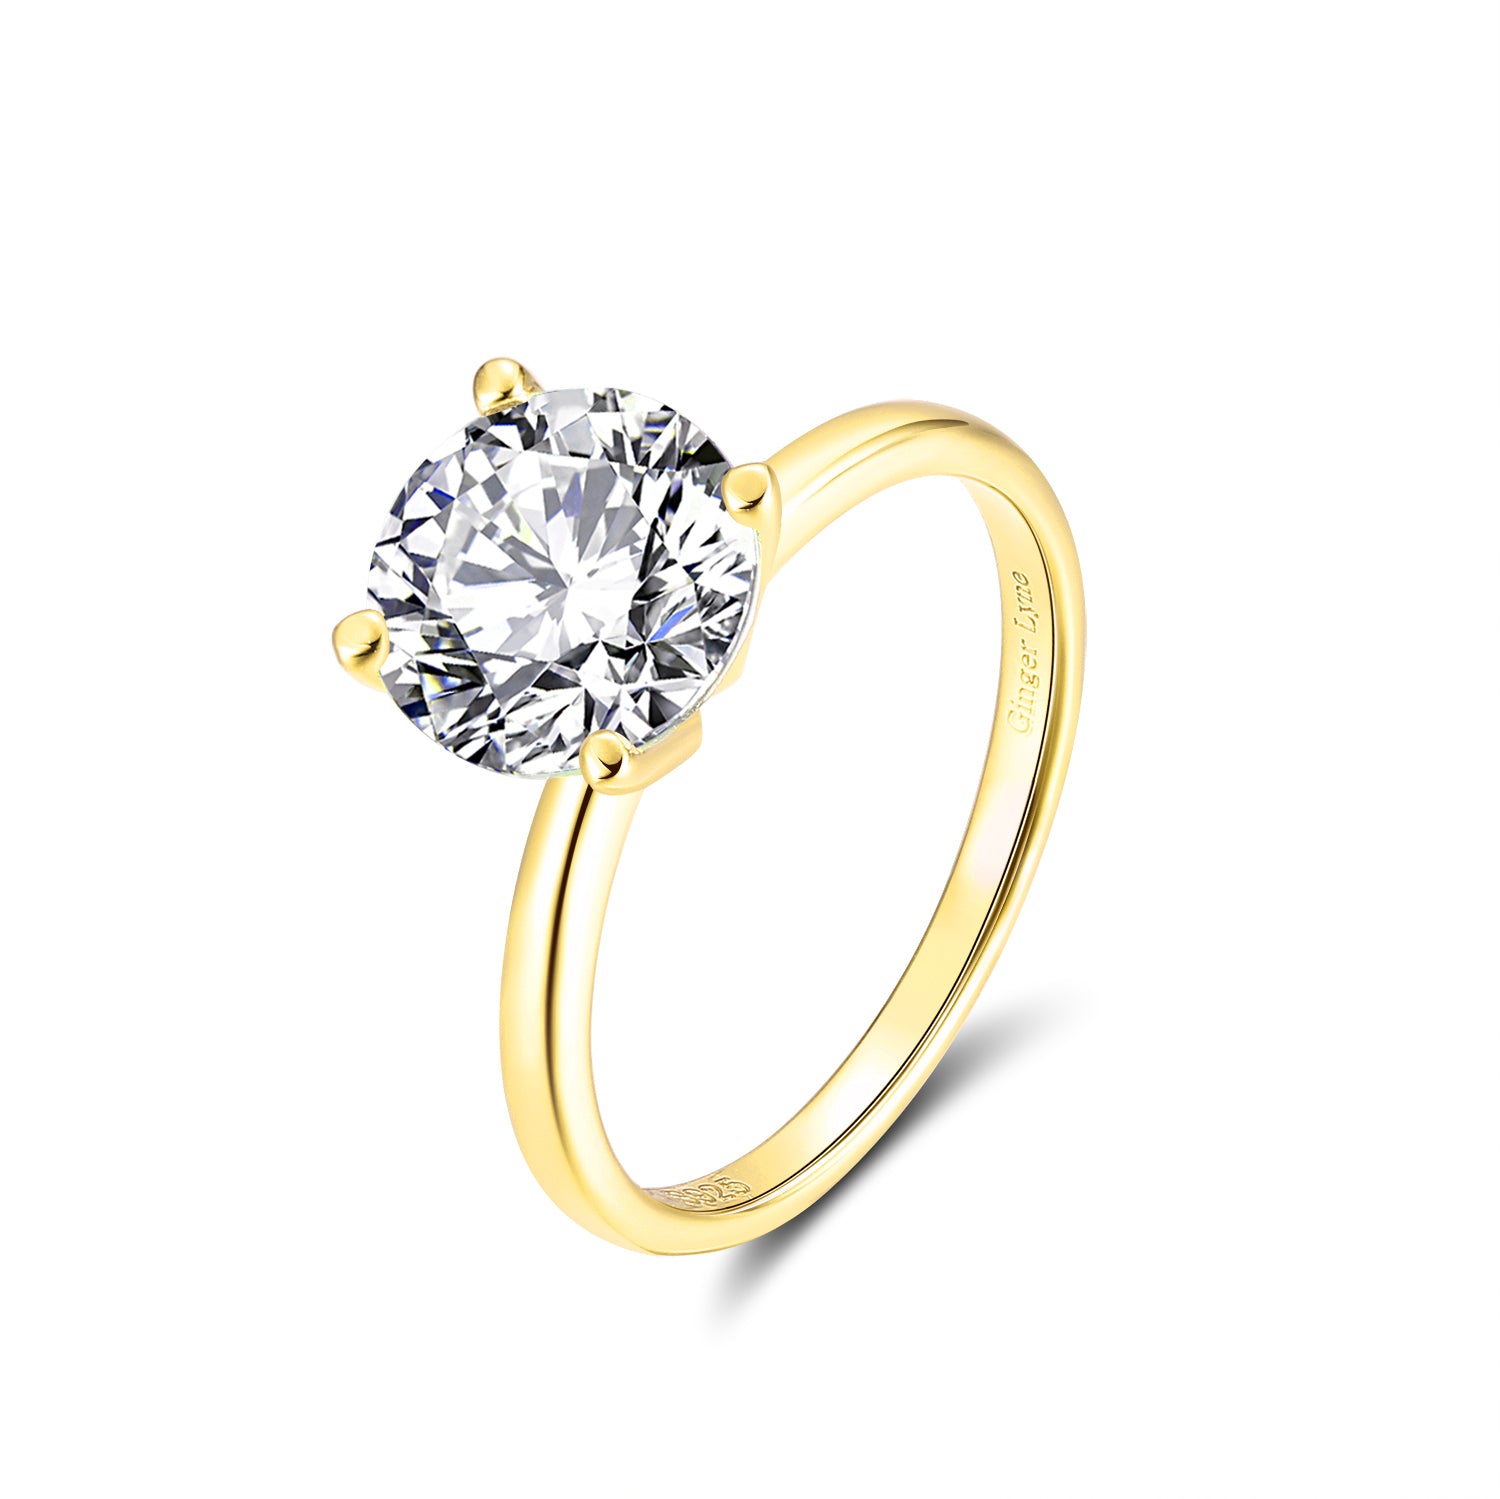 Amore Engagement Ring Women Gold Sterling Silver 2Ct Topaz Ginger Lyne Collection - Gold 2Carat,10